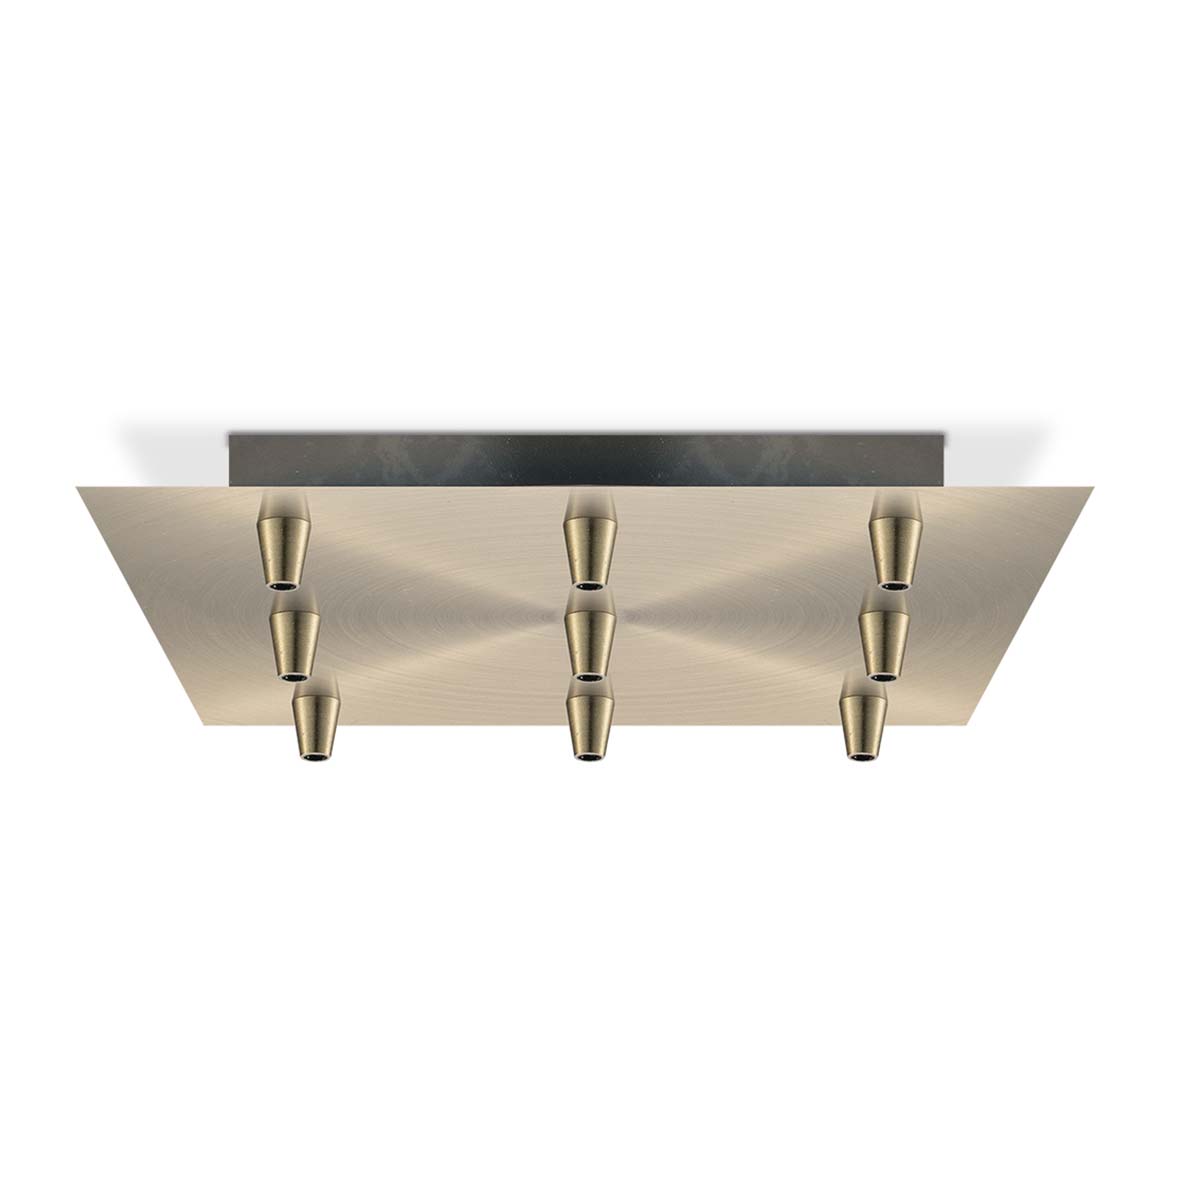 Tangla lighting - TLCP017-09BS - Metal 9 Lights square canopy large - adjustable brass